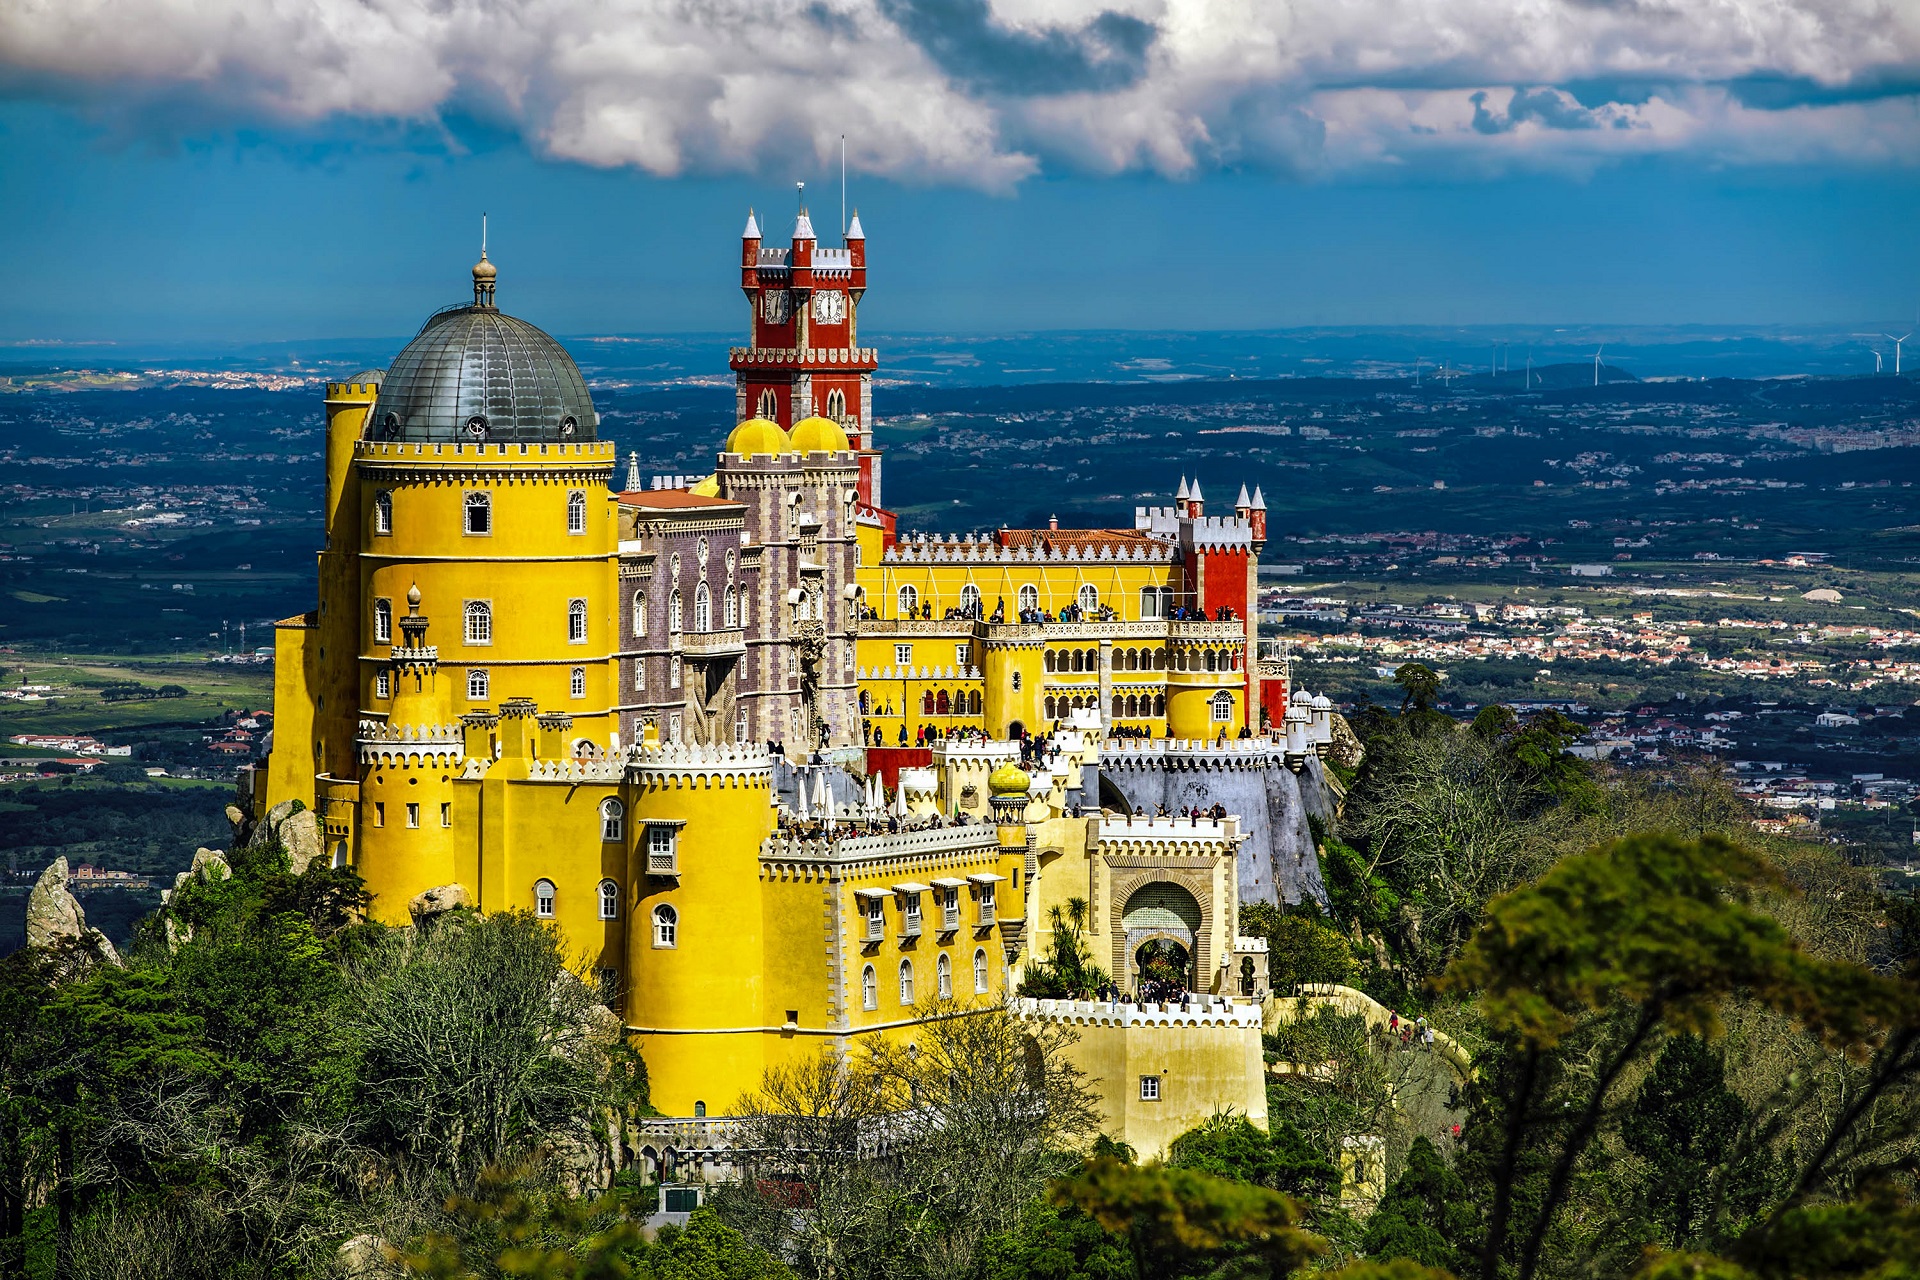 Losjes Automatisch Lodge Sintra, a must-see getaway from Lisbon